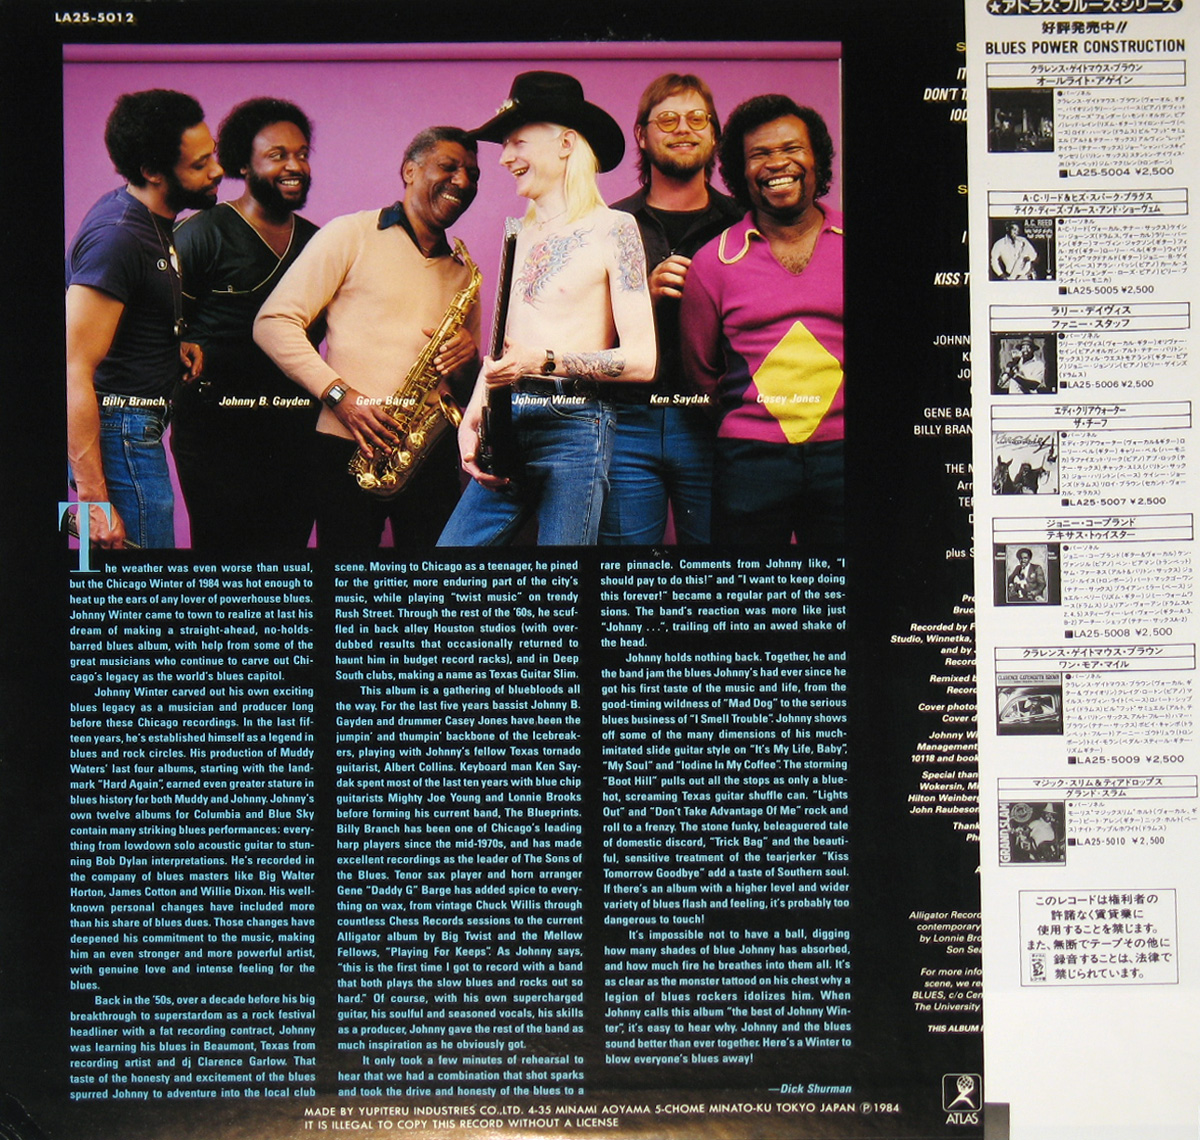 Band Photo and liner notes on The Back Cover 